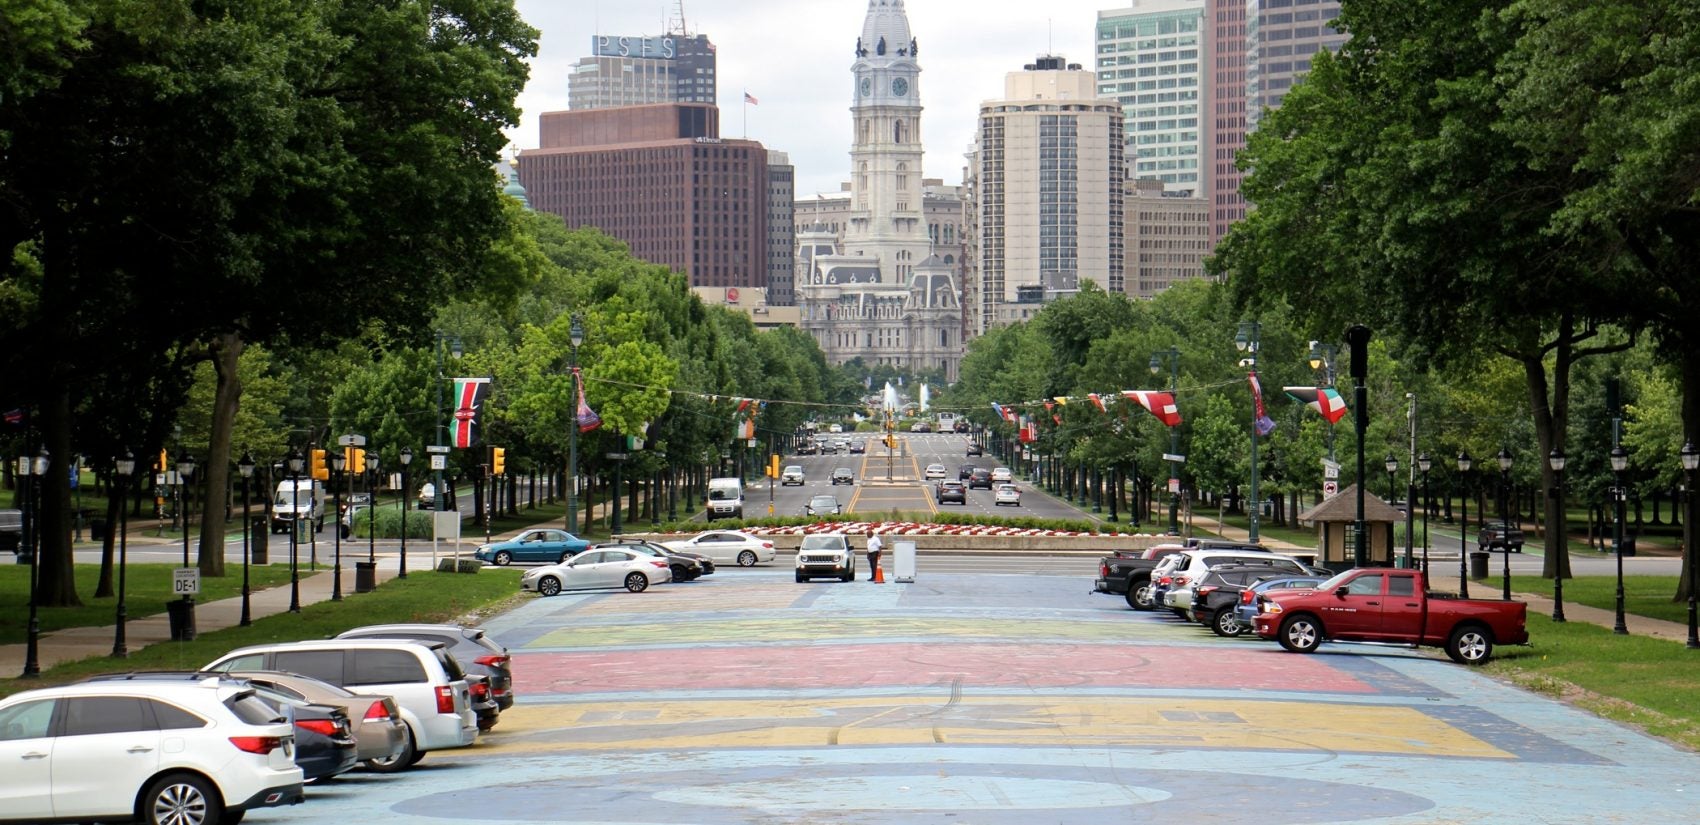 Looking east toward City Hall from Eakins Oval.